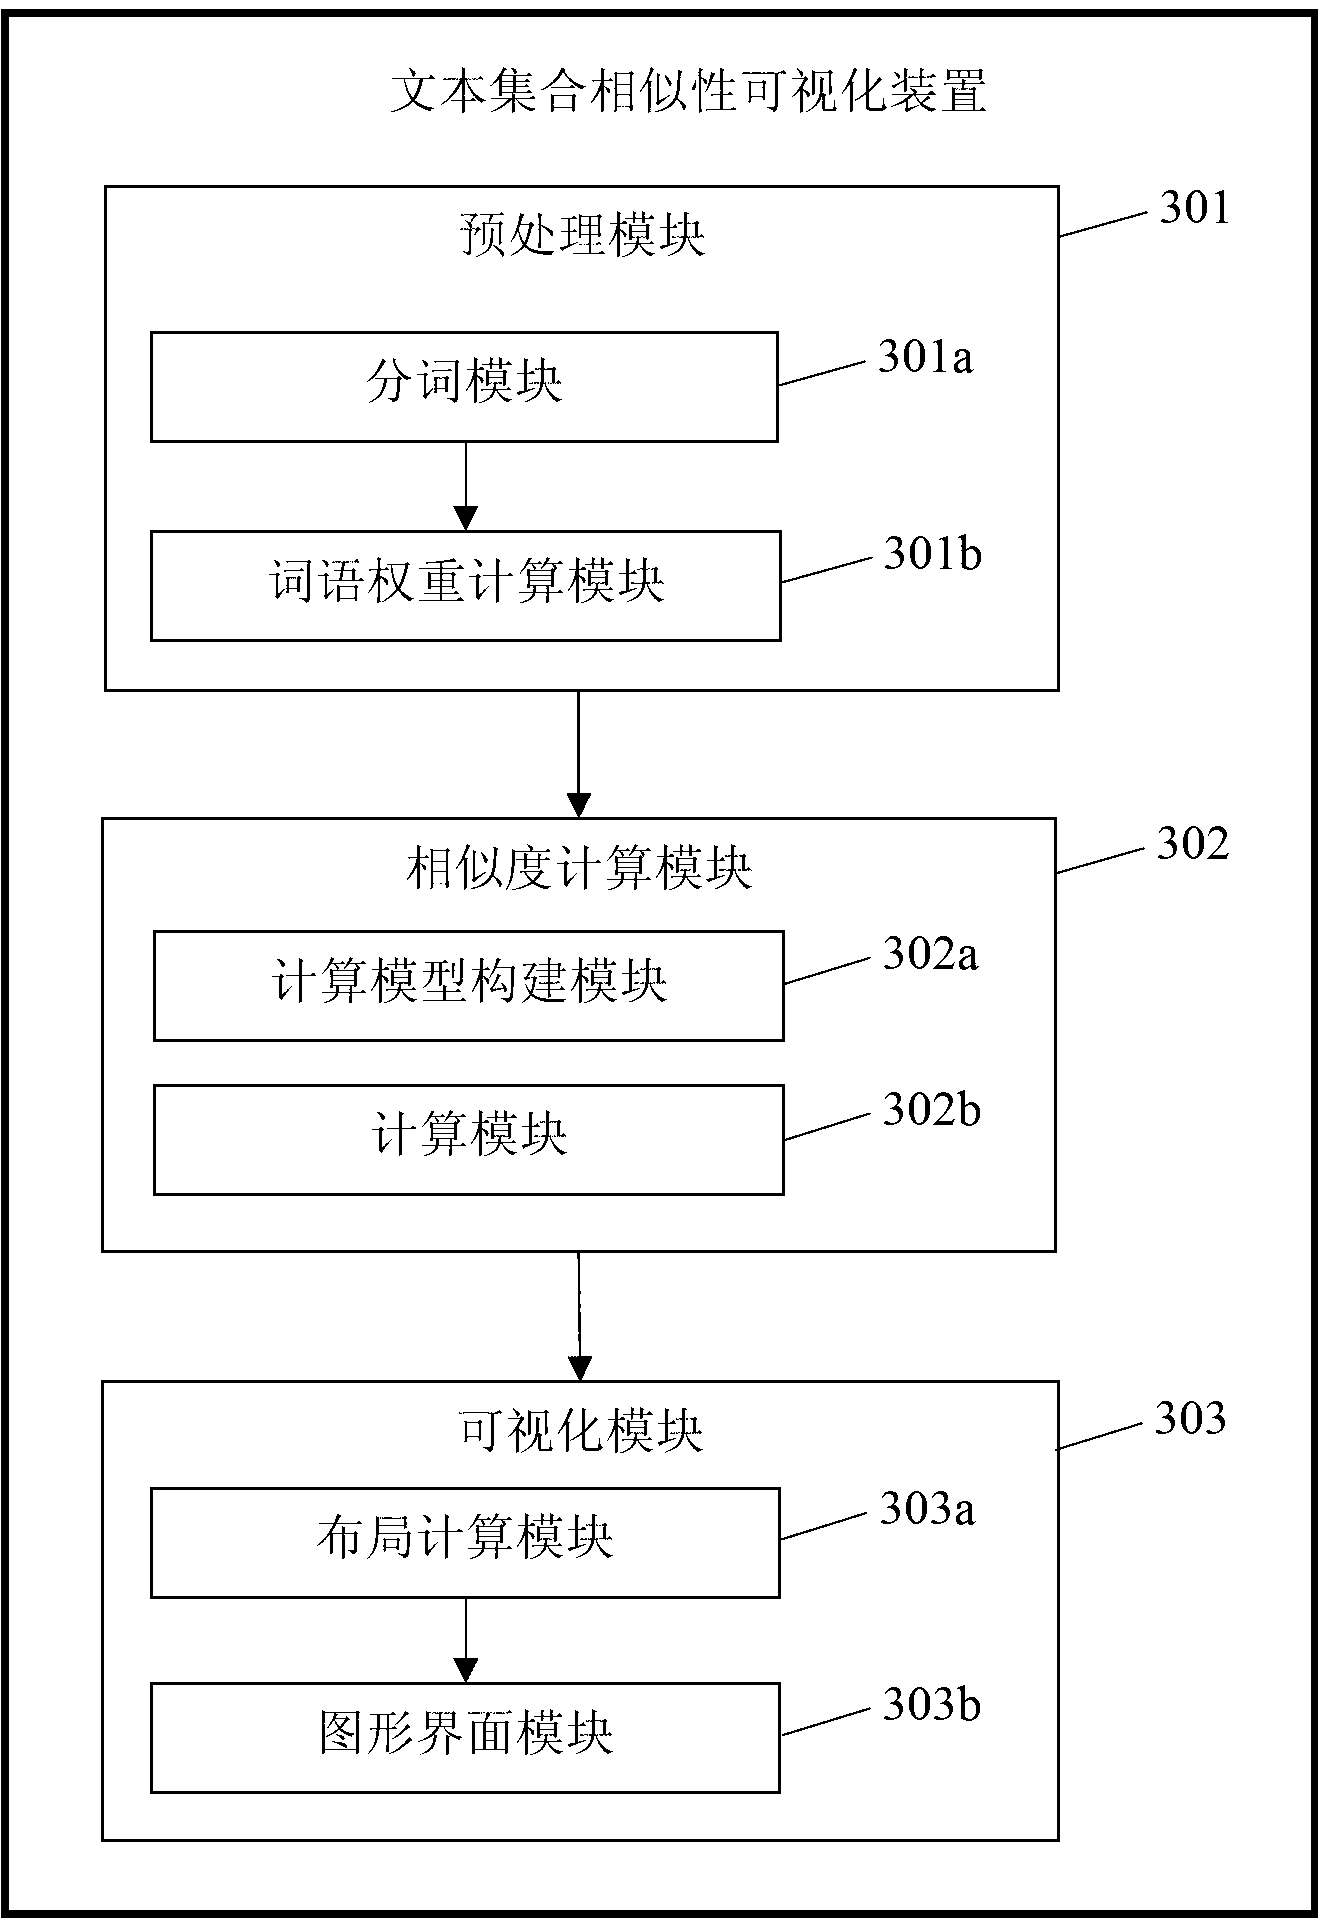 Method and device for visualizing text set similarity